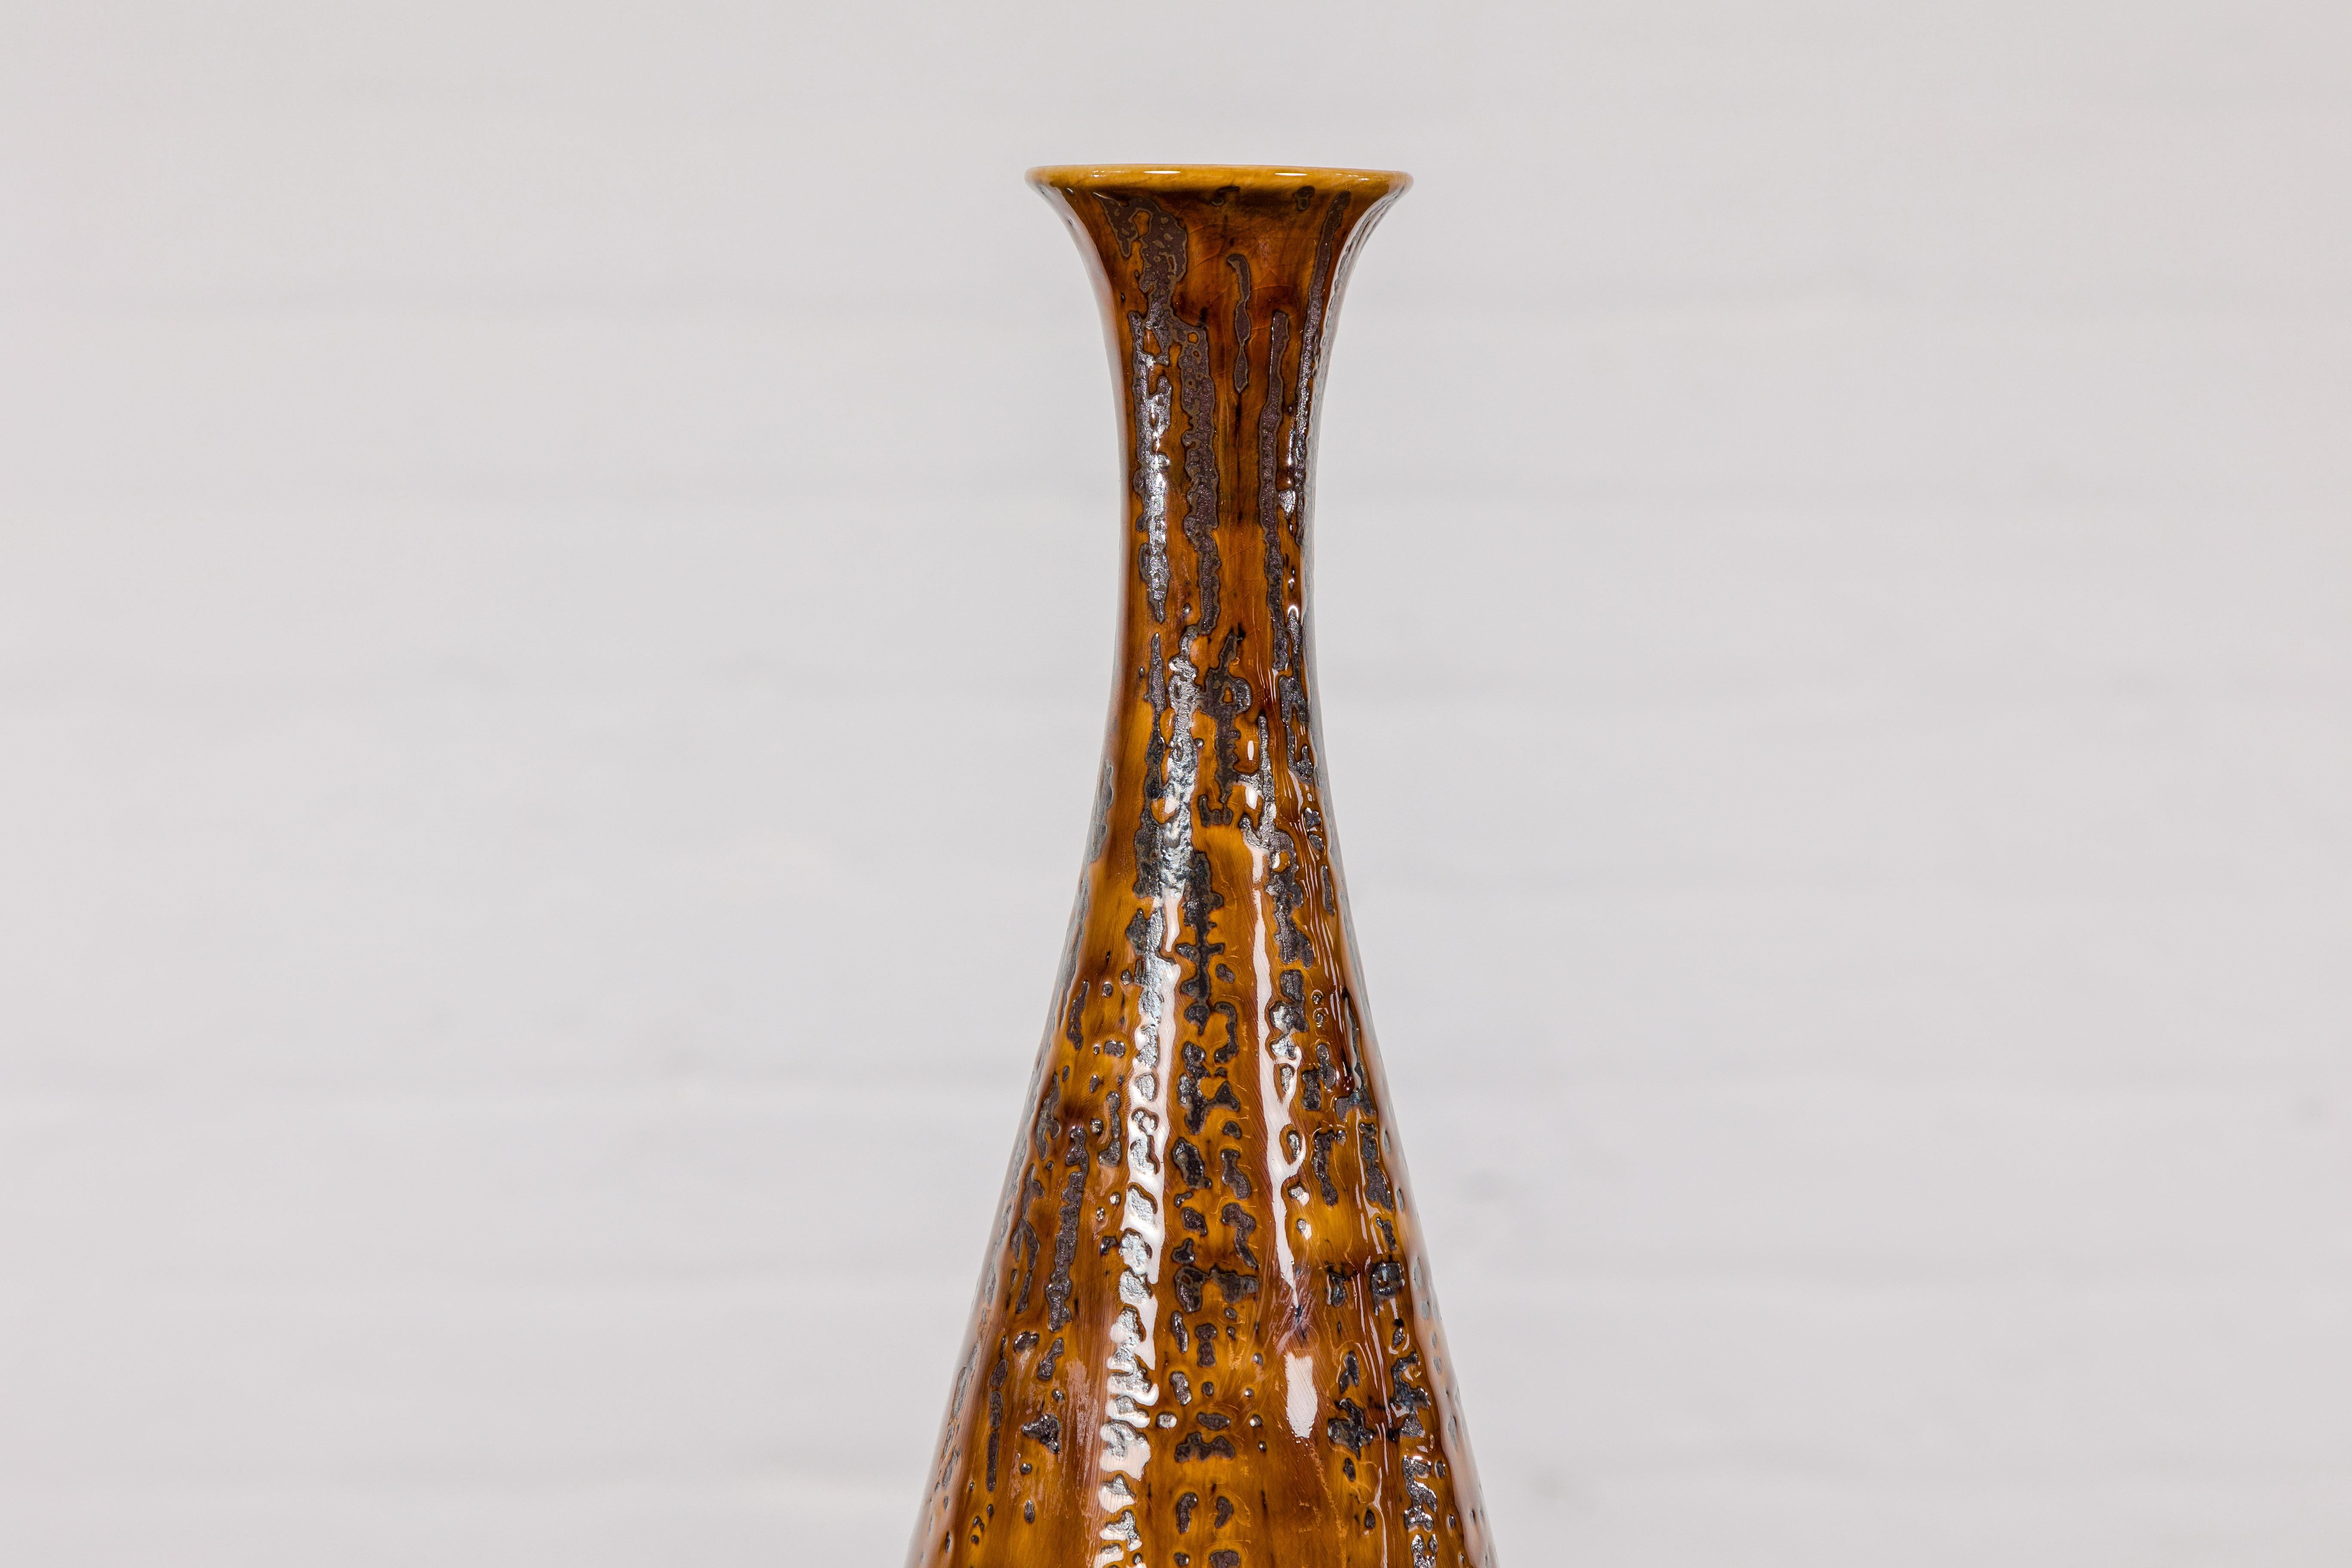 Textured Two-Tone Brown Tall Vase with Narrow Mouth, Elegant Home Decor In Excellent Condition For Sale In Yonkers, NY